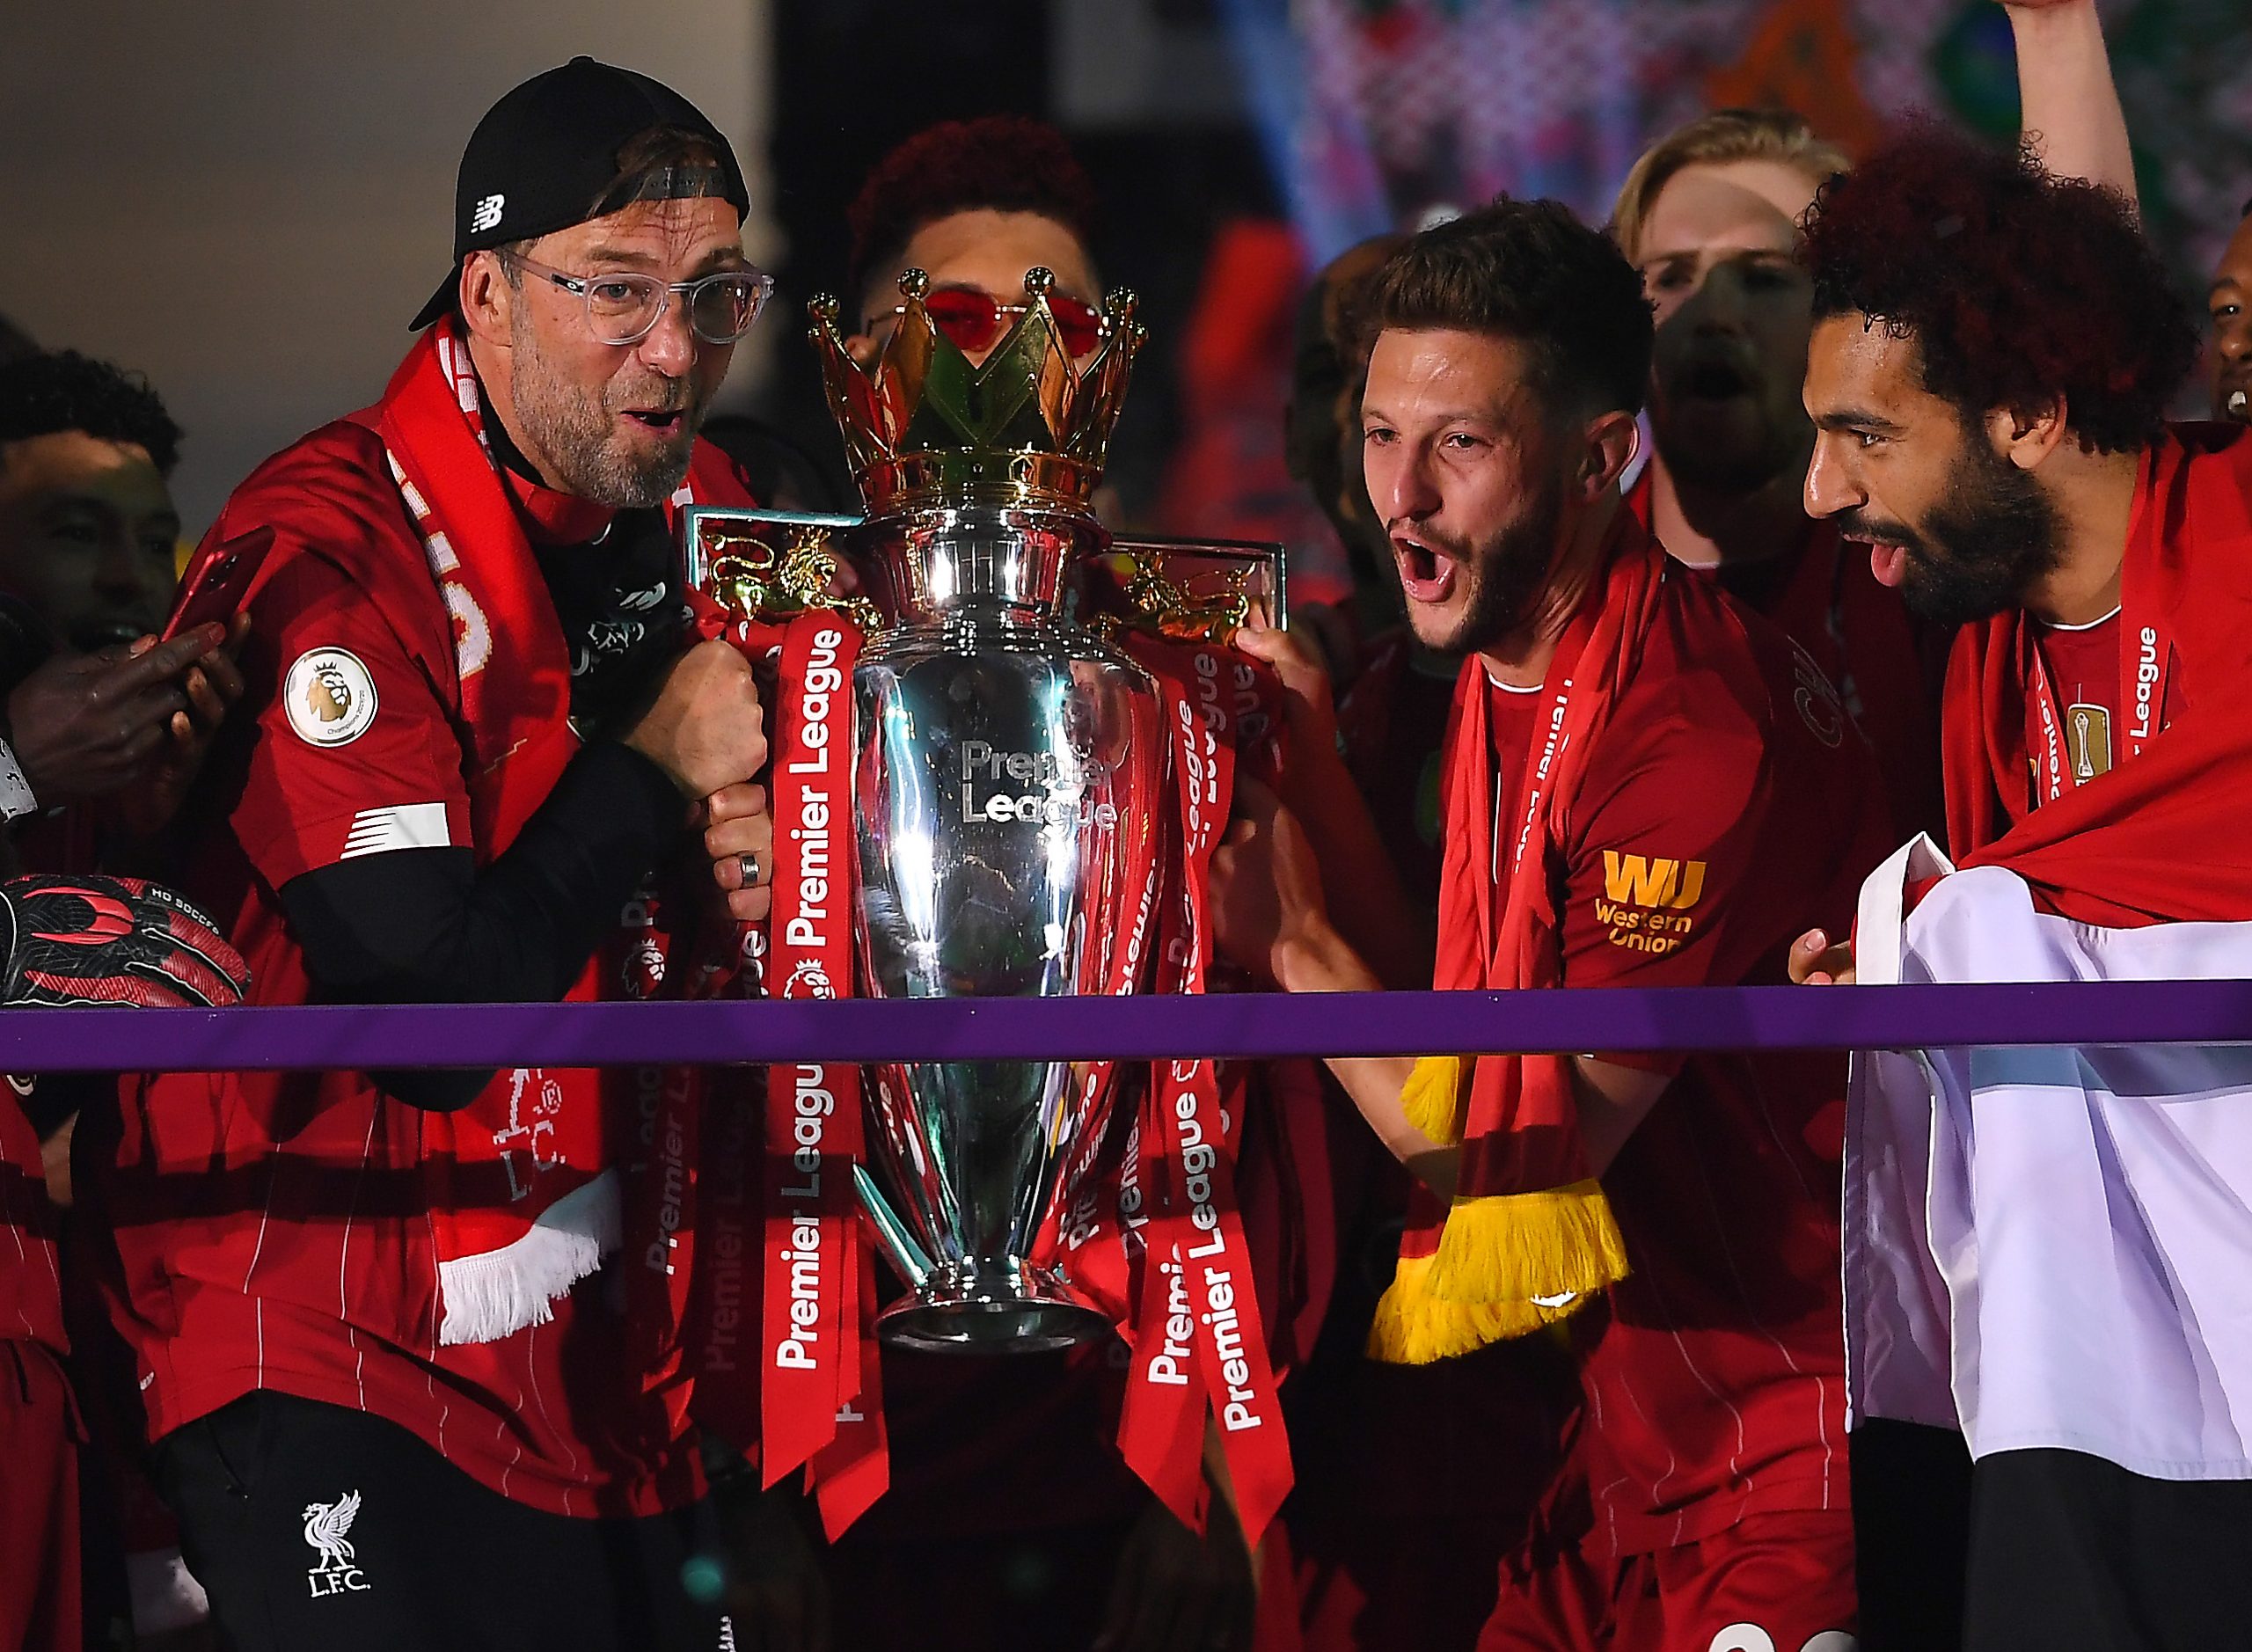 Strongest Liverpool lineup for the new season (Liverpool players and manager celebrating in the picture)